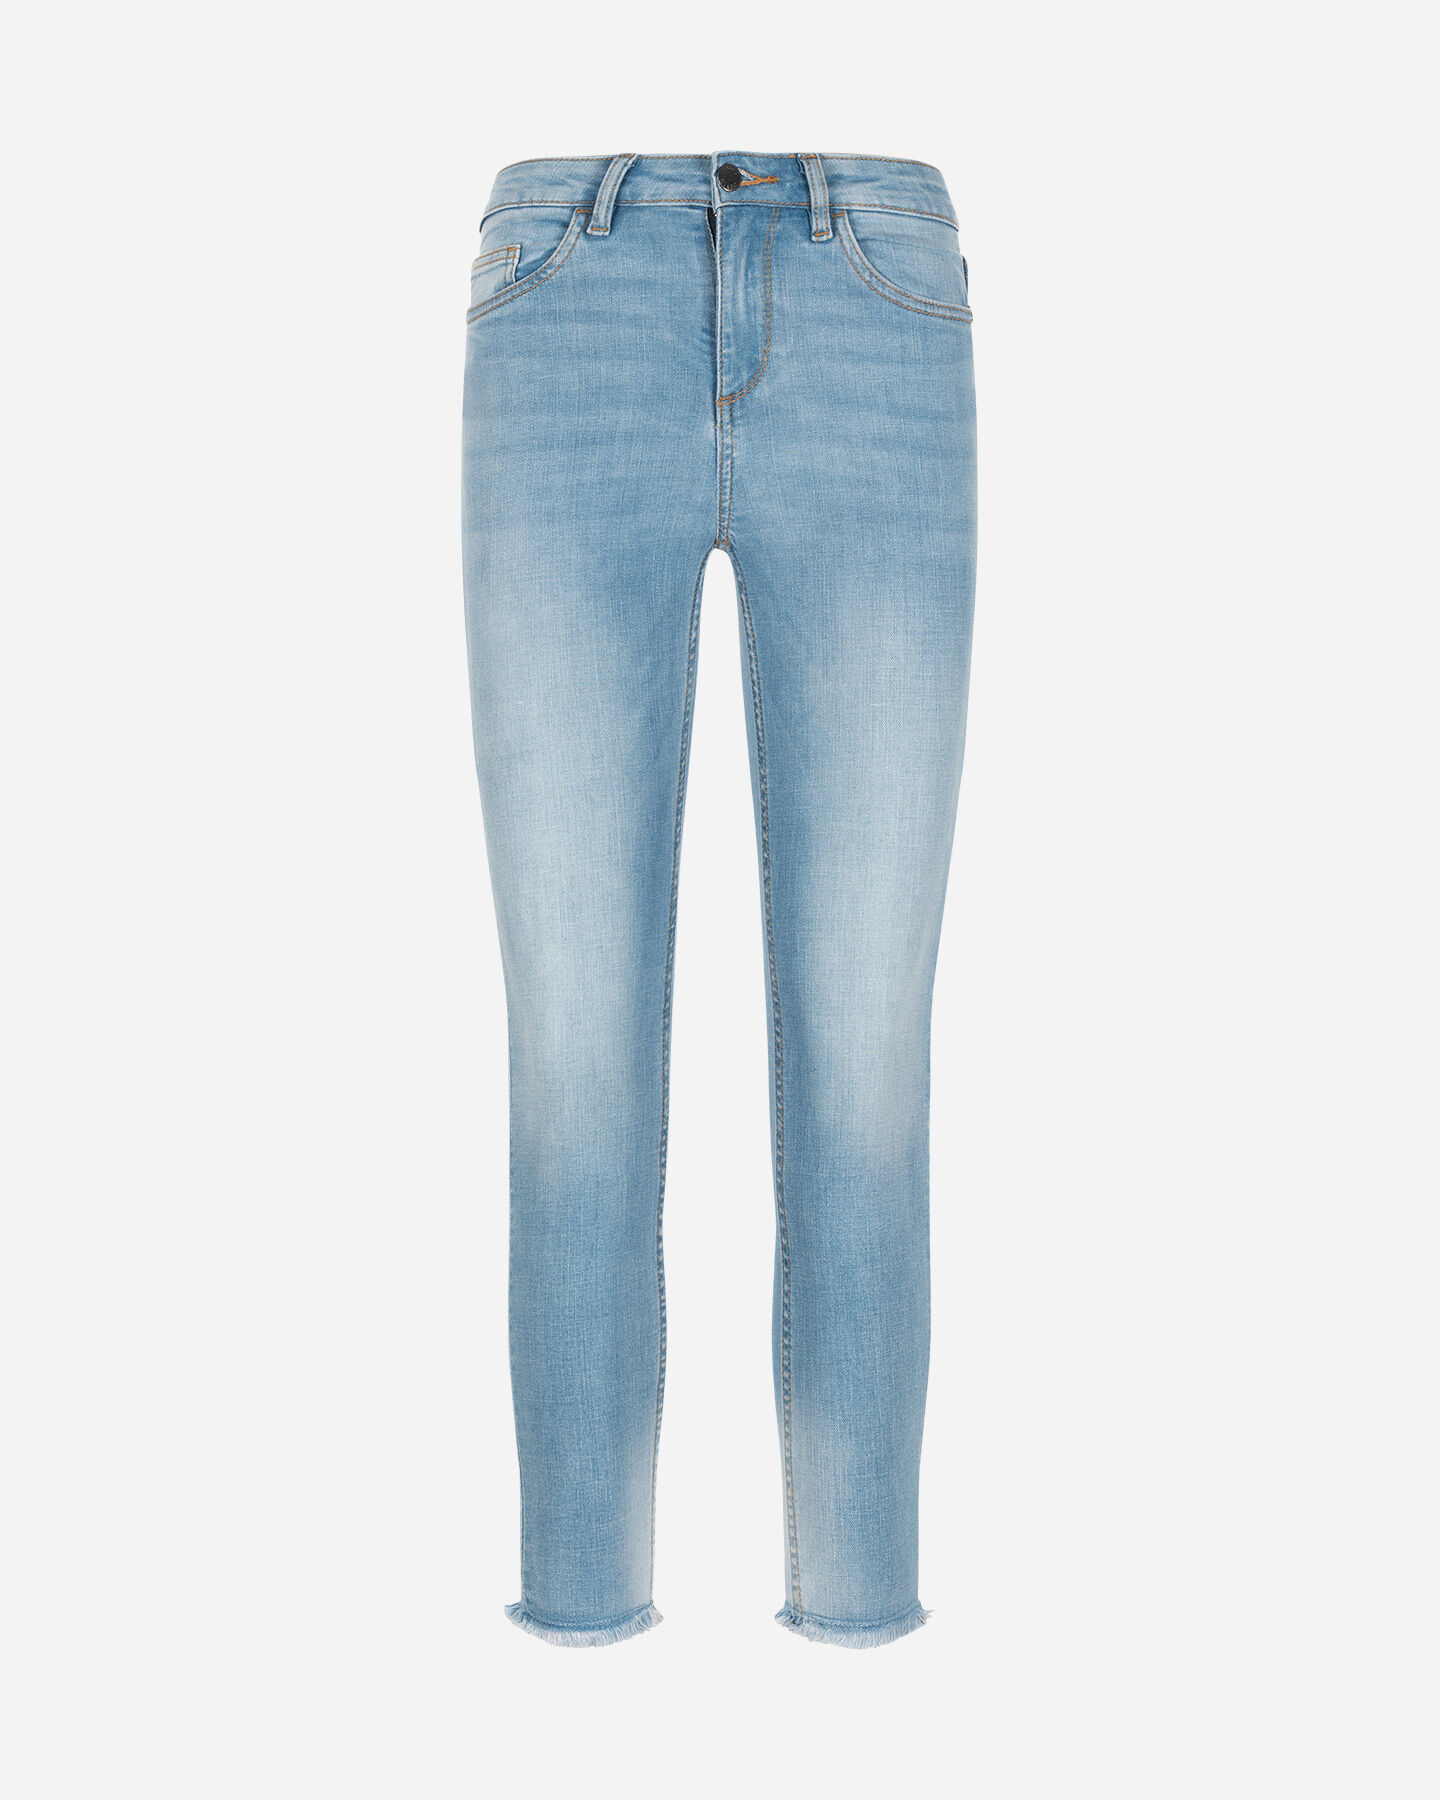  Jeans DACK'S ESSENTIAL W S4129824|LD|40 scatto 4